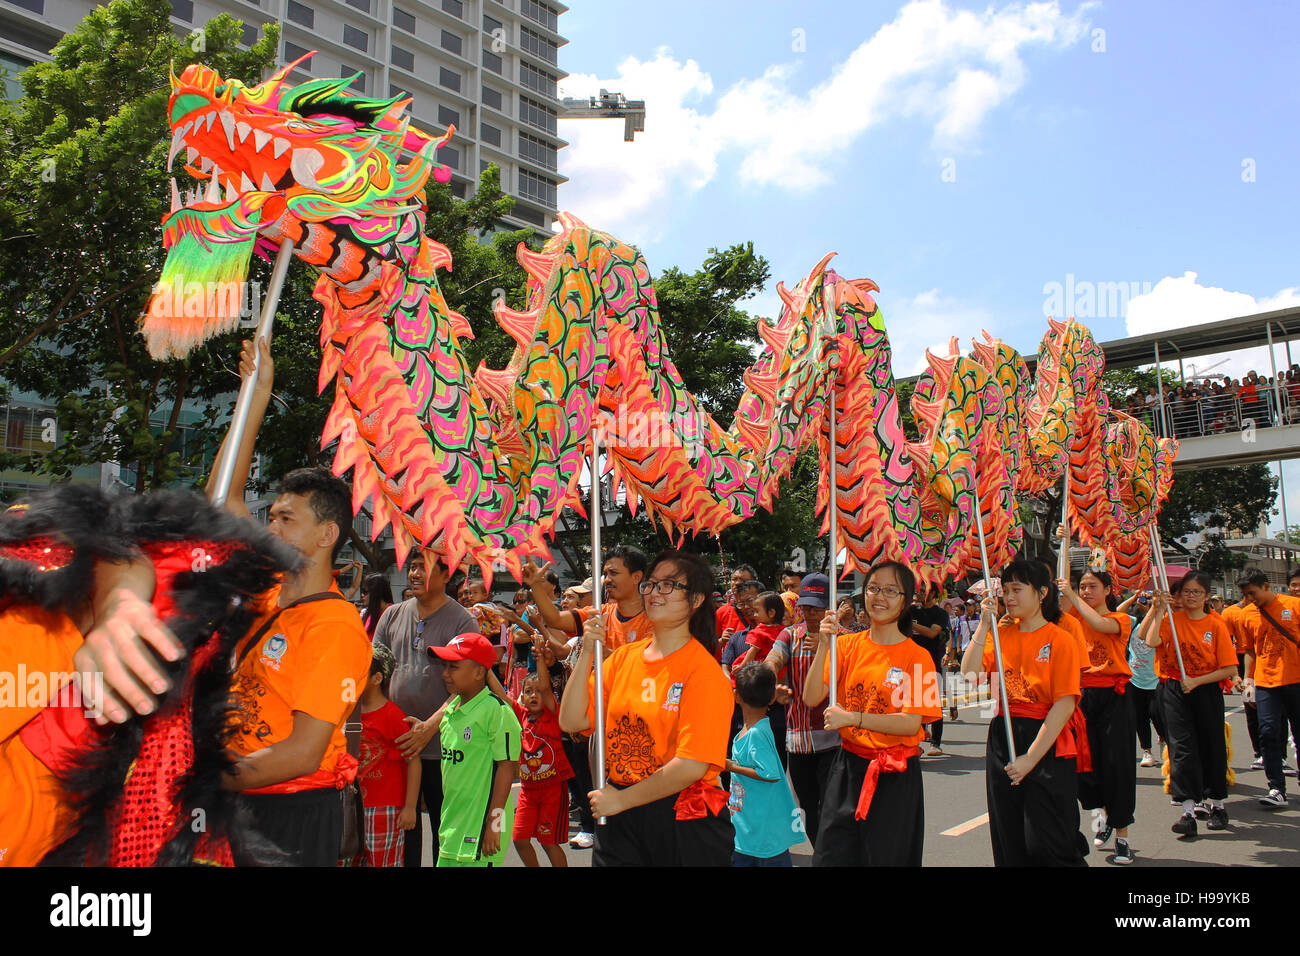 Players of liong or dragon in Chinese mythology in Cap Go Meh carnival which held at Glodok, Jakarta. Stock Photo